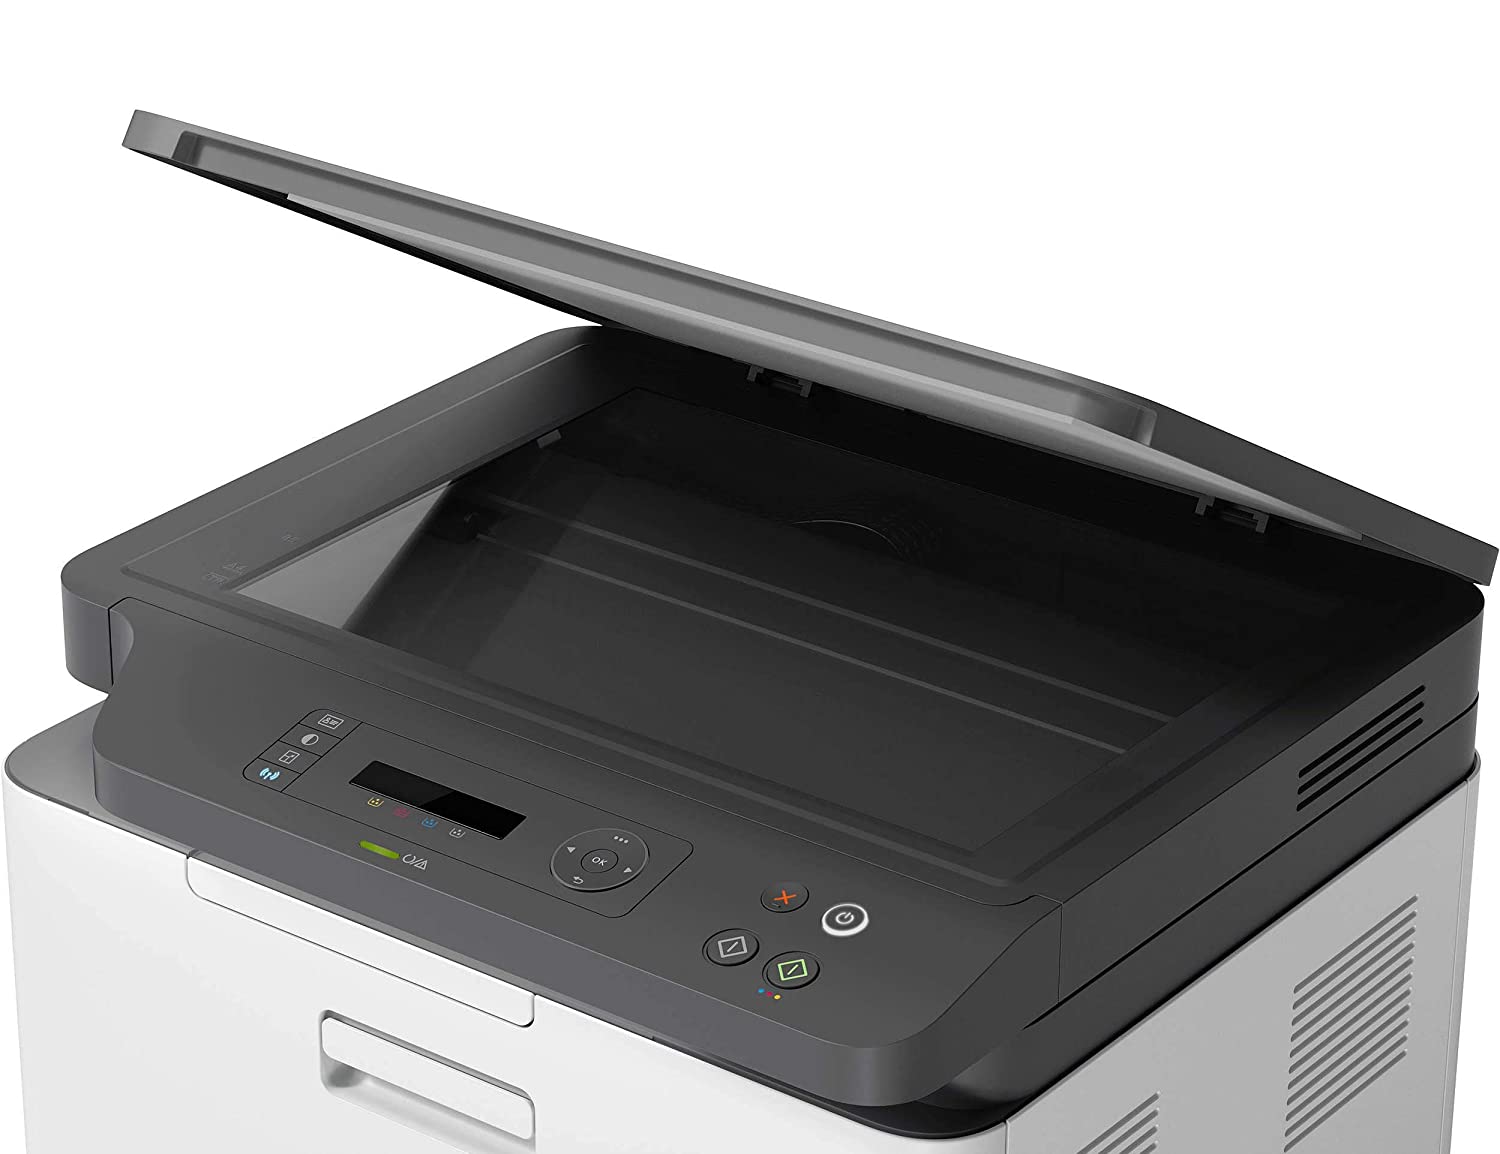 HP Color Laser MFP 178nw Printer:IN